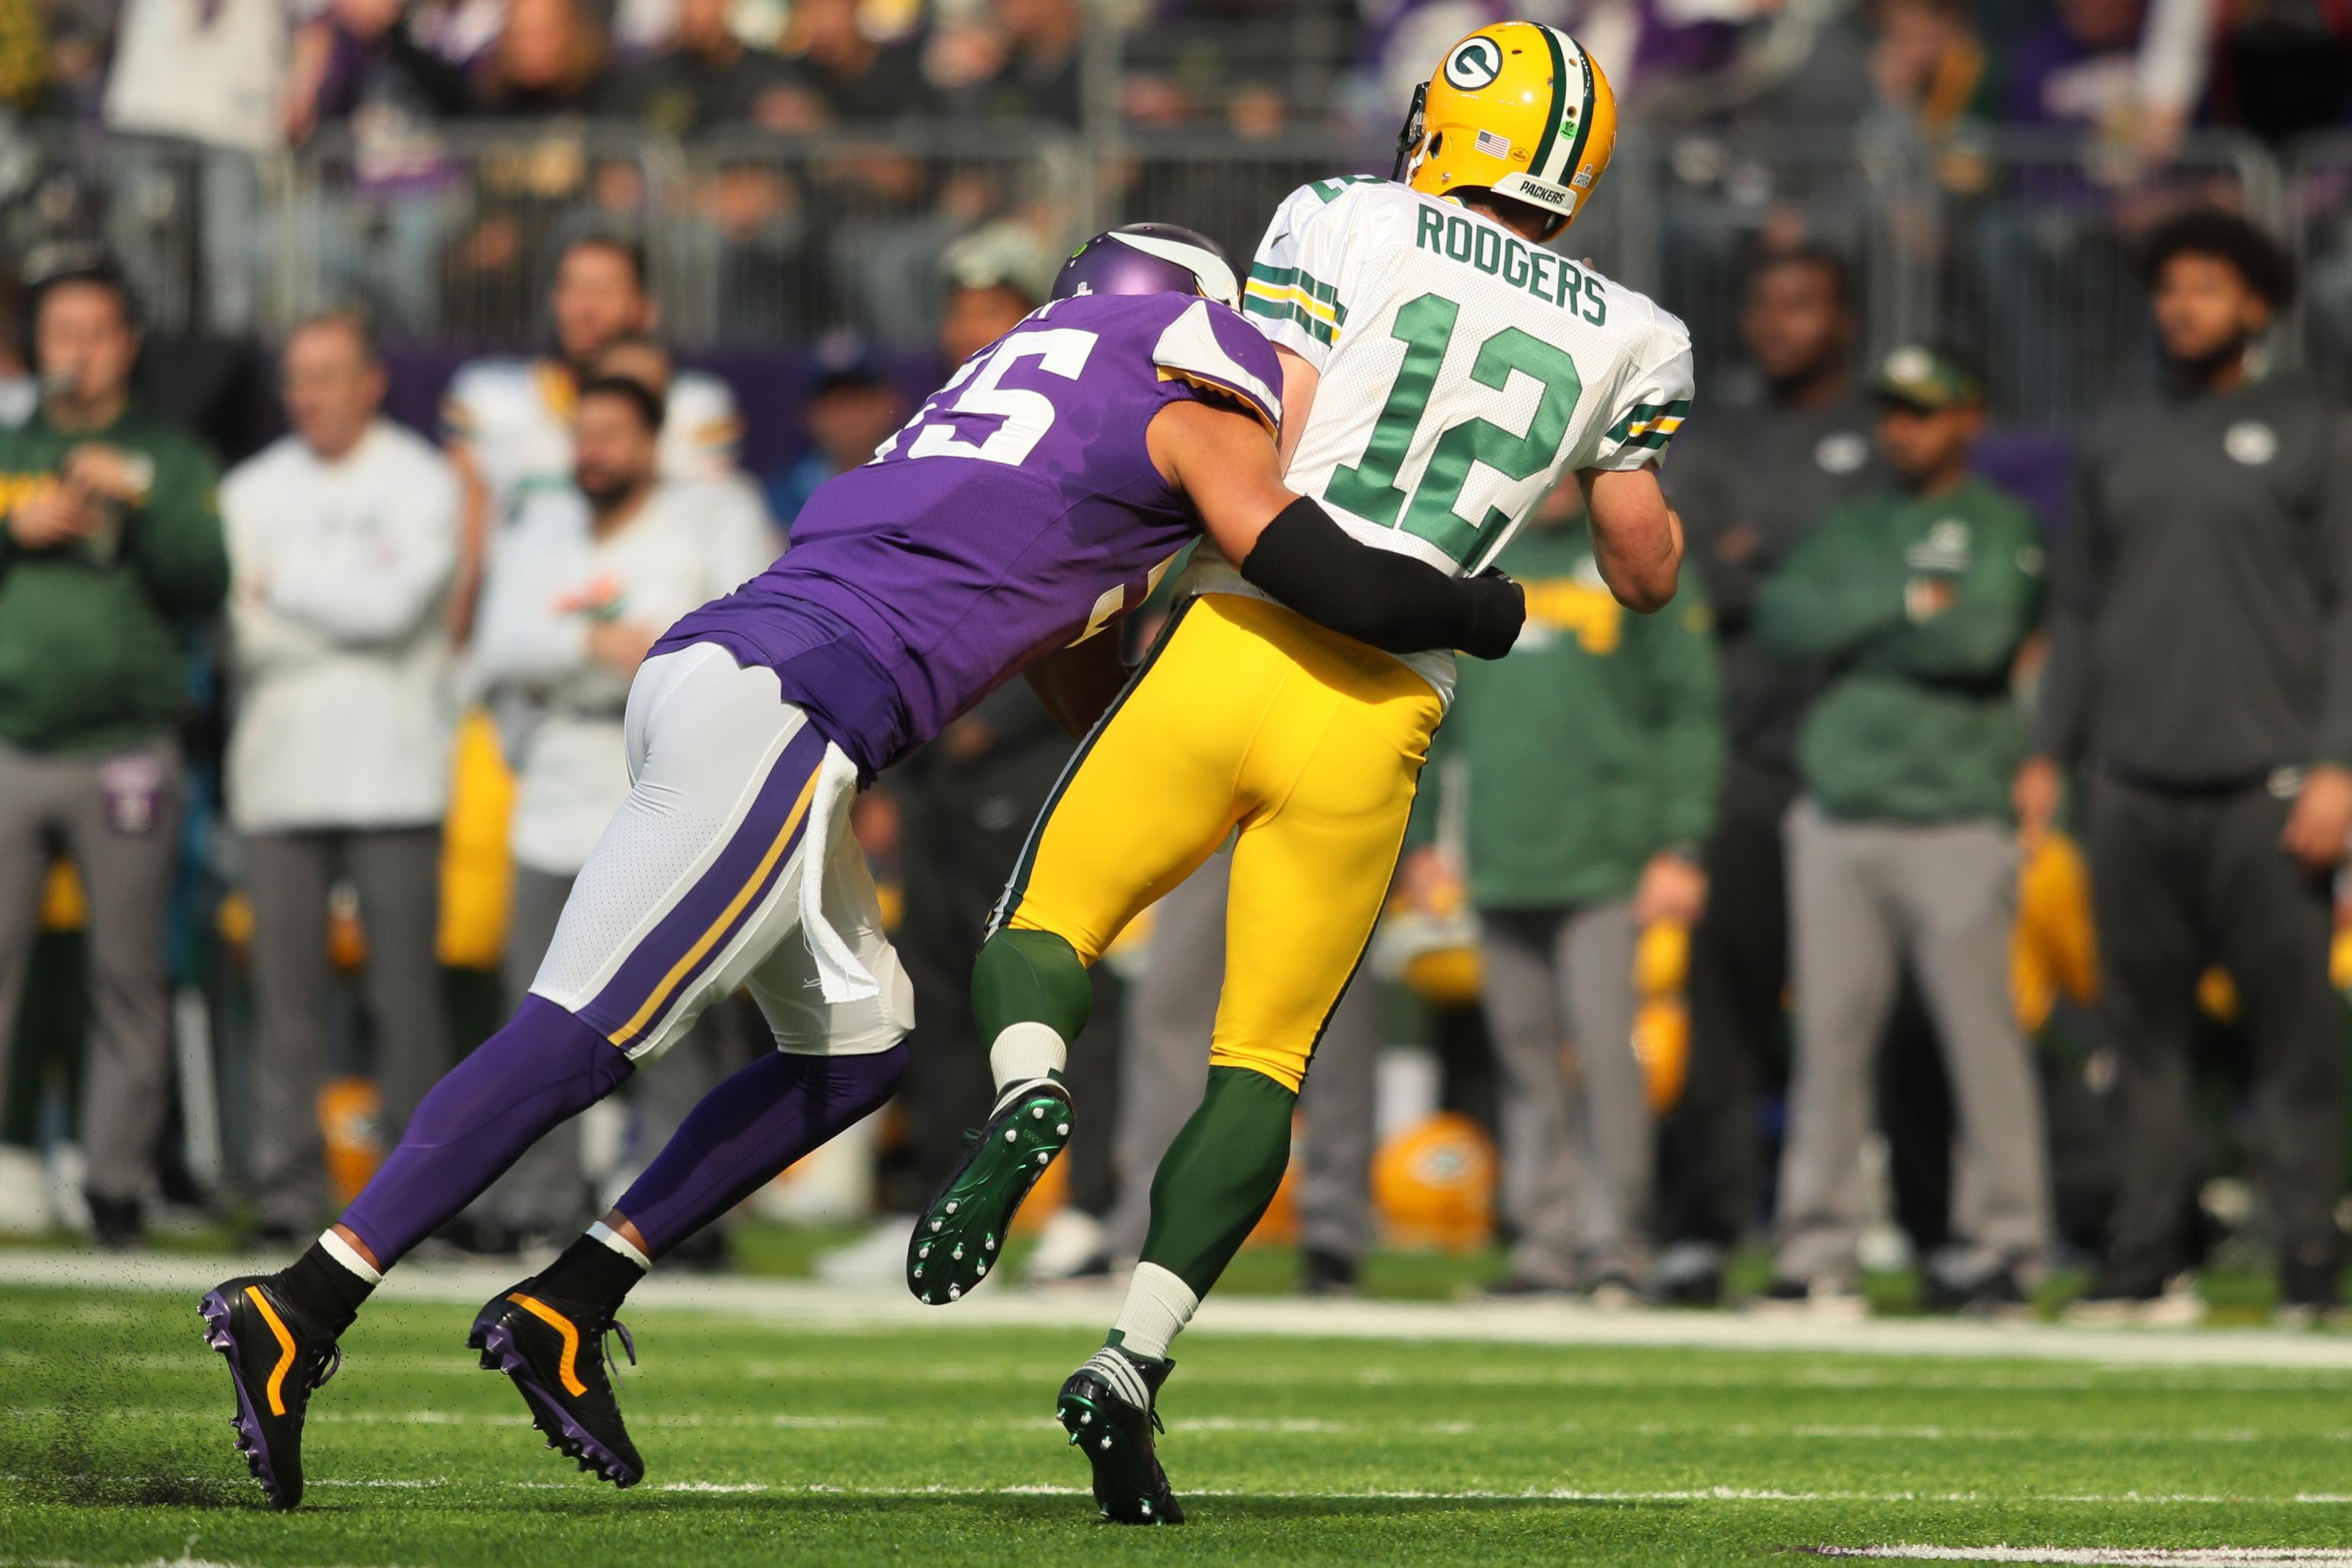 Anthony Barr S Controversial Hit On Aaron Rodgers Would Be Penalty This Season Bleacher Report Latest News Videos And Highlights